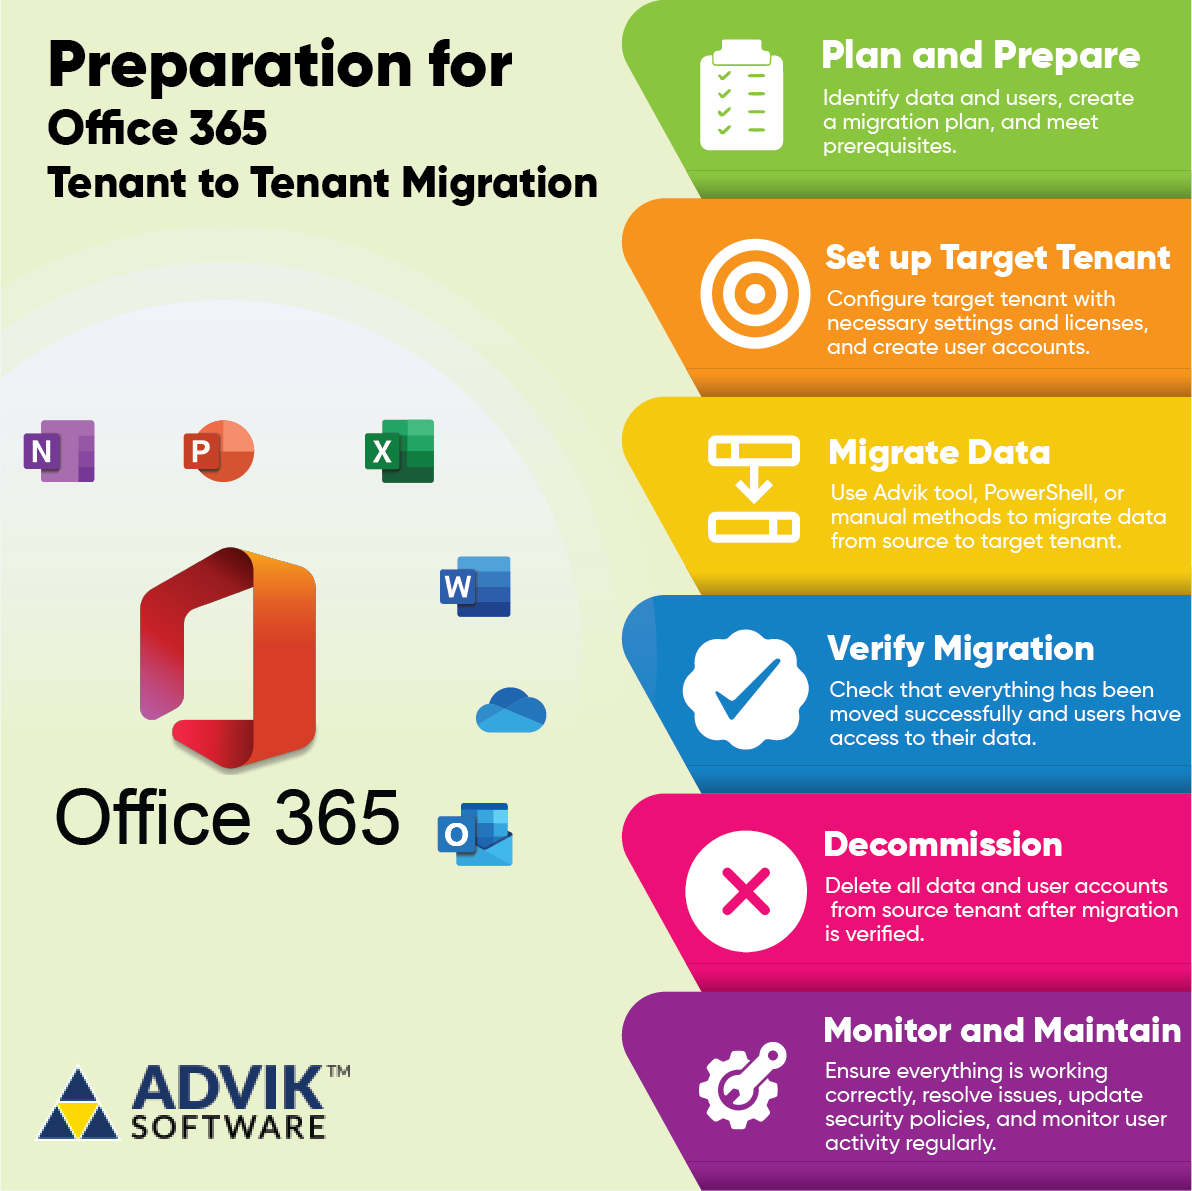 Preparation for Office 365 Tenant to Tenant Migration